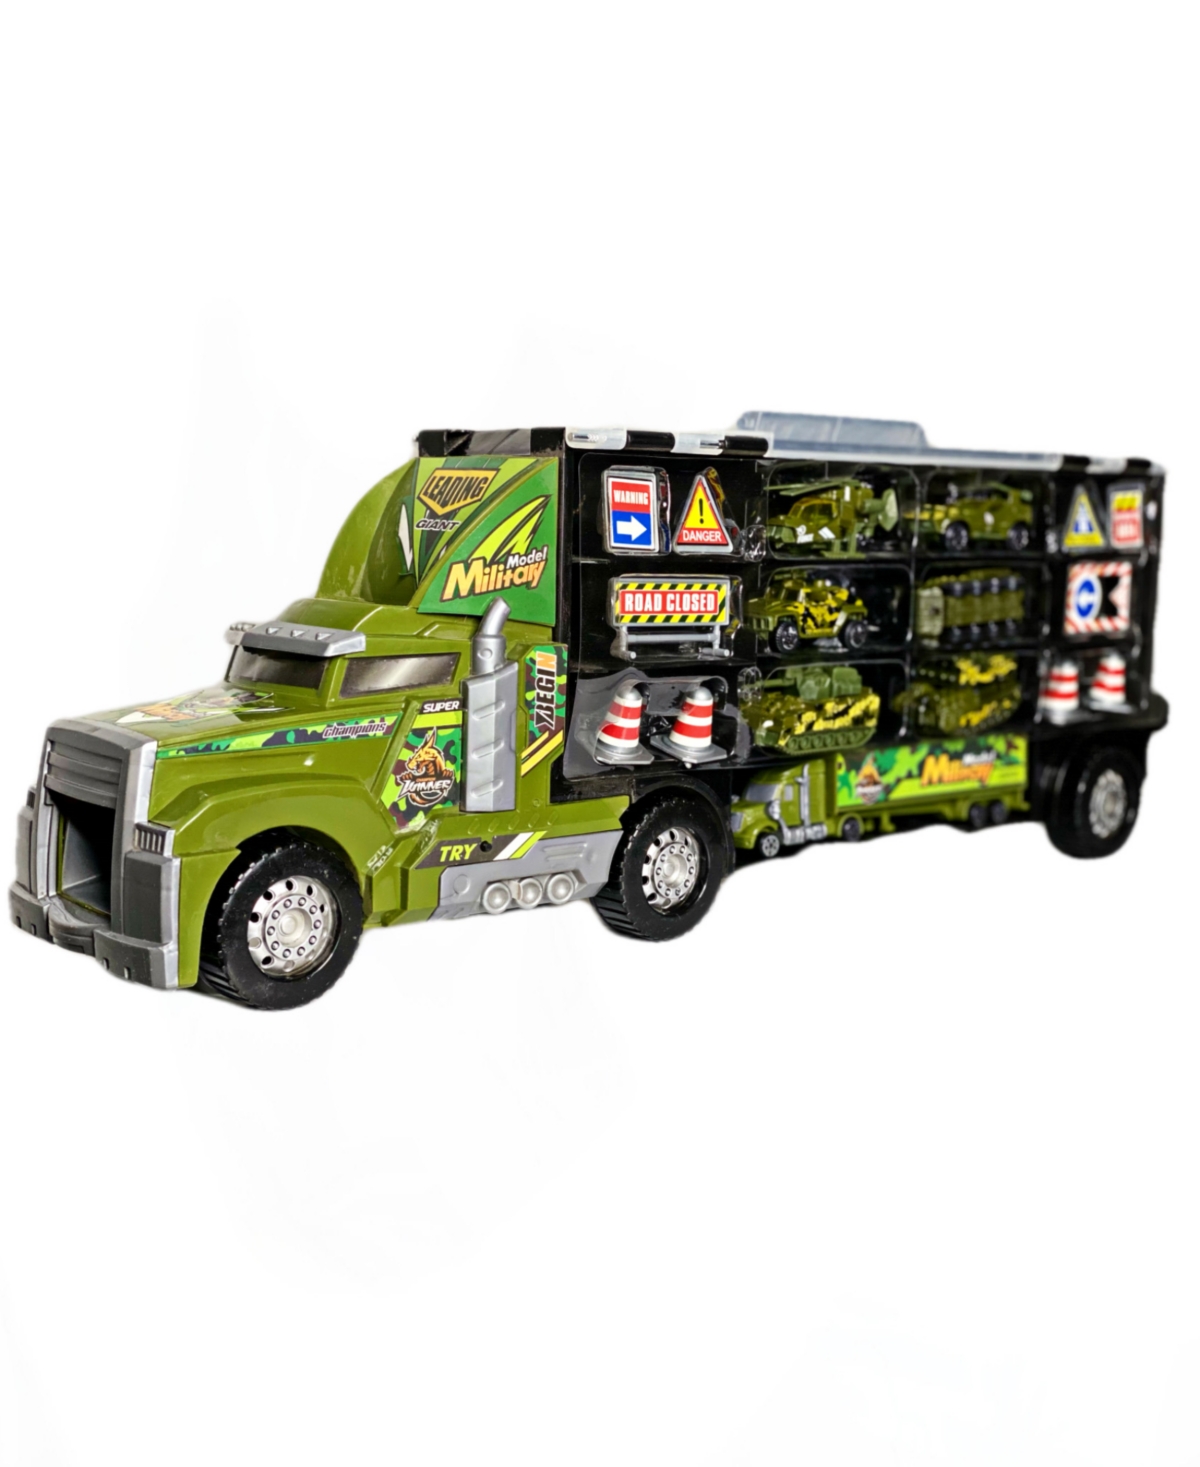 Big Daddy Military-inspired Big Rig Play Set, 9 Pieces In Multi Colored Plastic